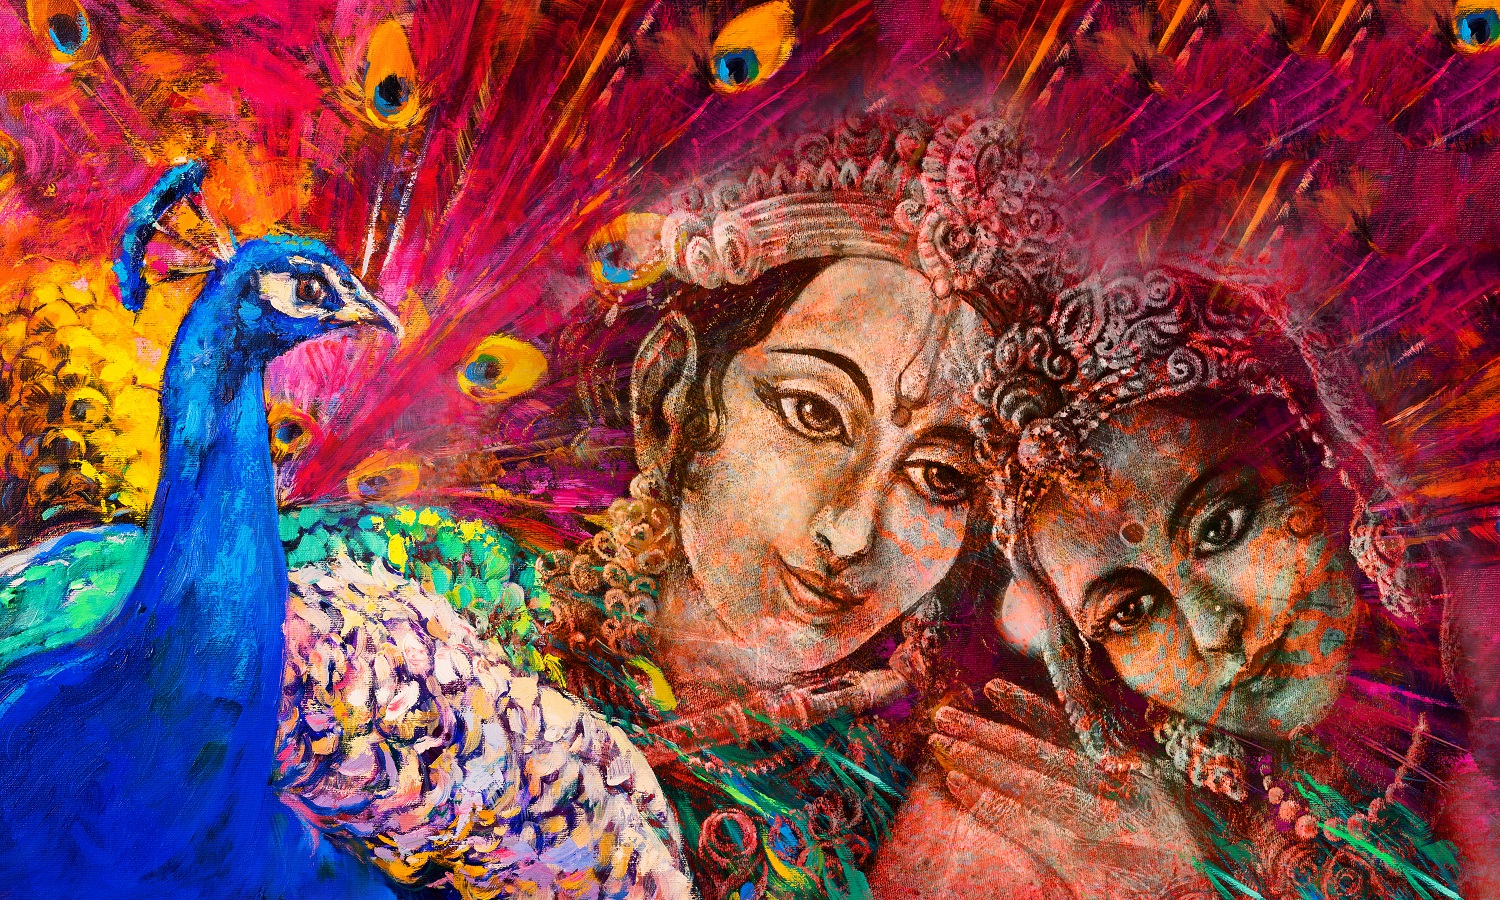 Wall painting with Radha Krishna with Peacock | Best Wallpaper for wall